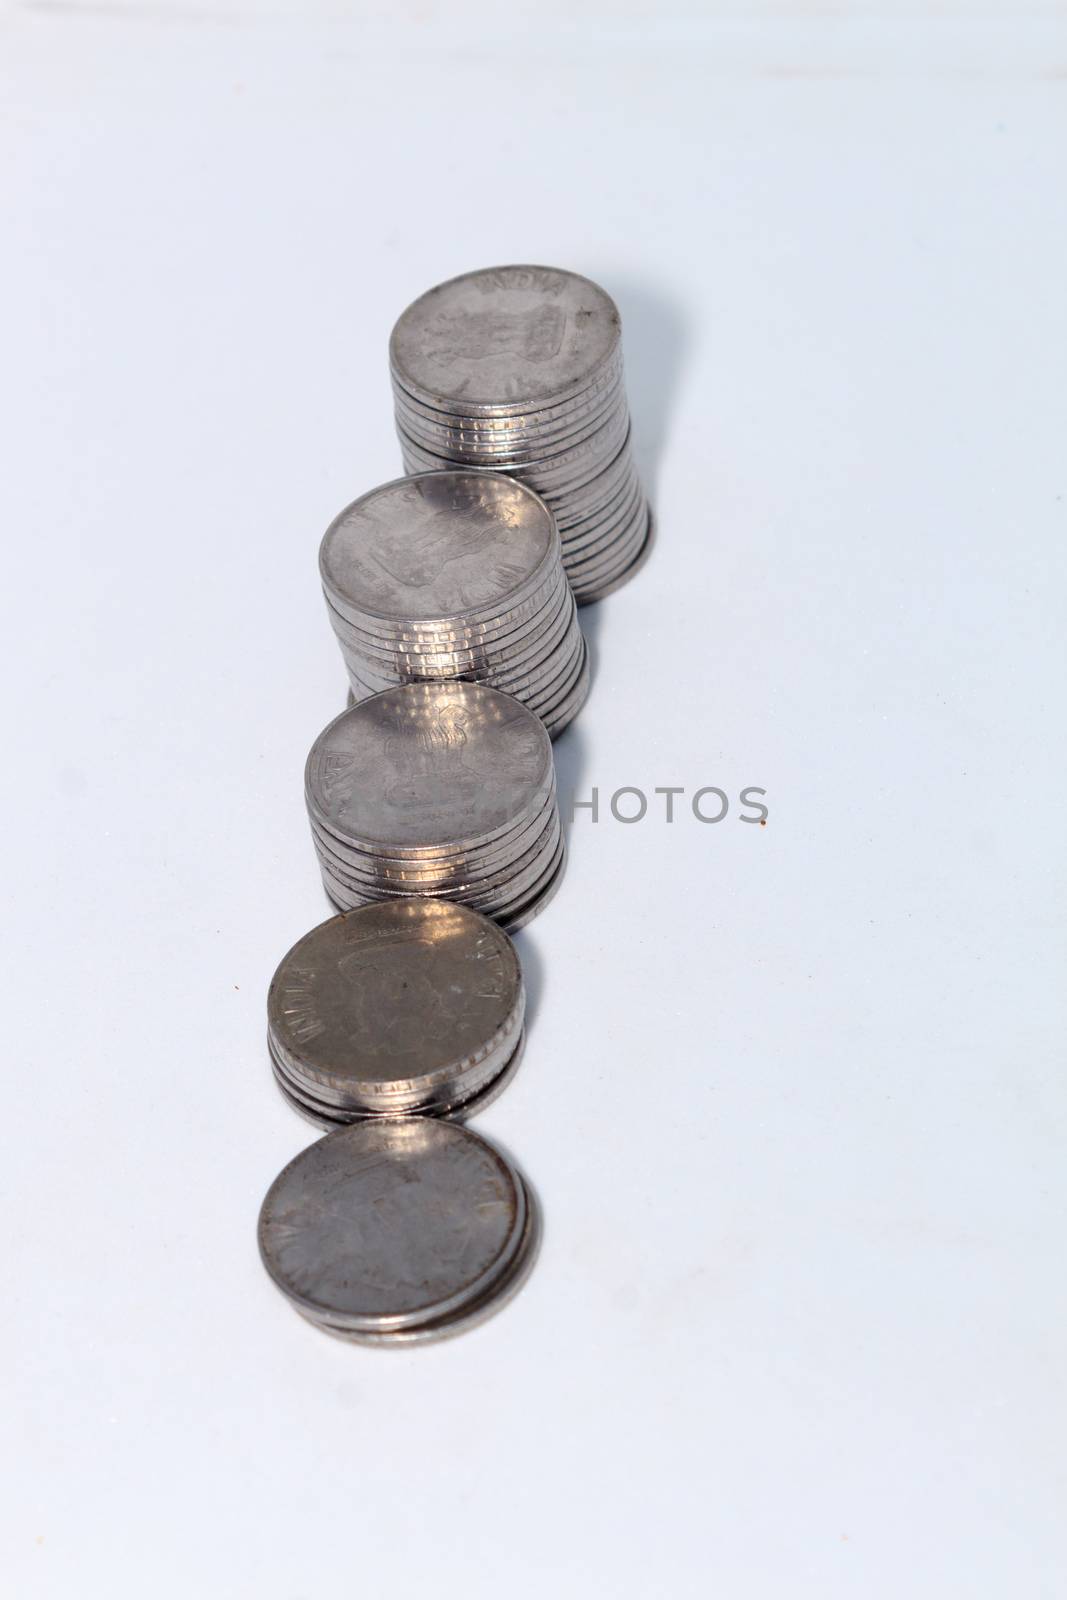 Stock pile 2 two Indian rupee metal coin currency on isolated white background. Financial, economy, investment growth concept. Banking and exchange object. closeup.